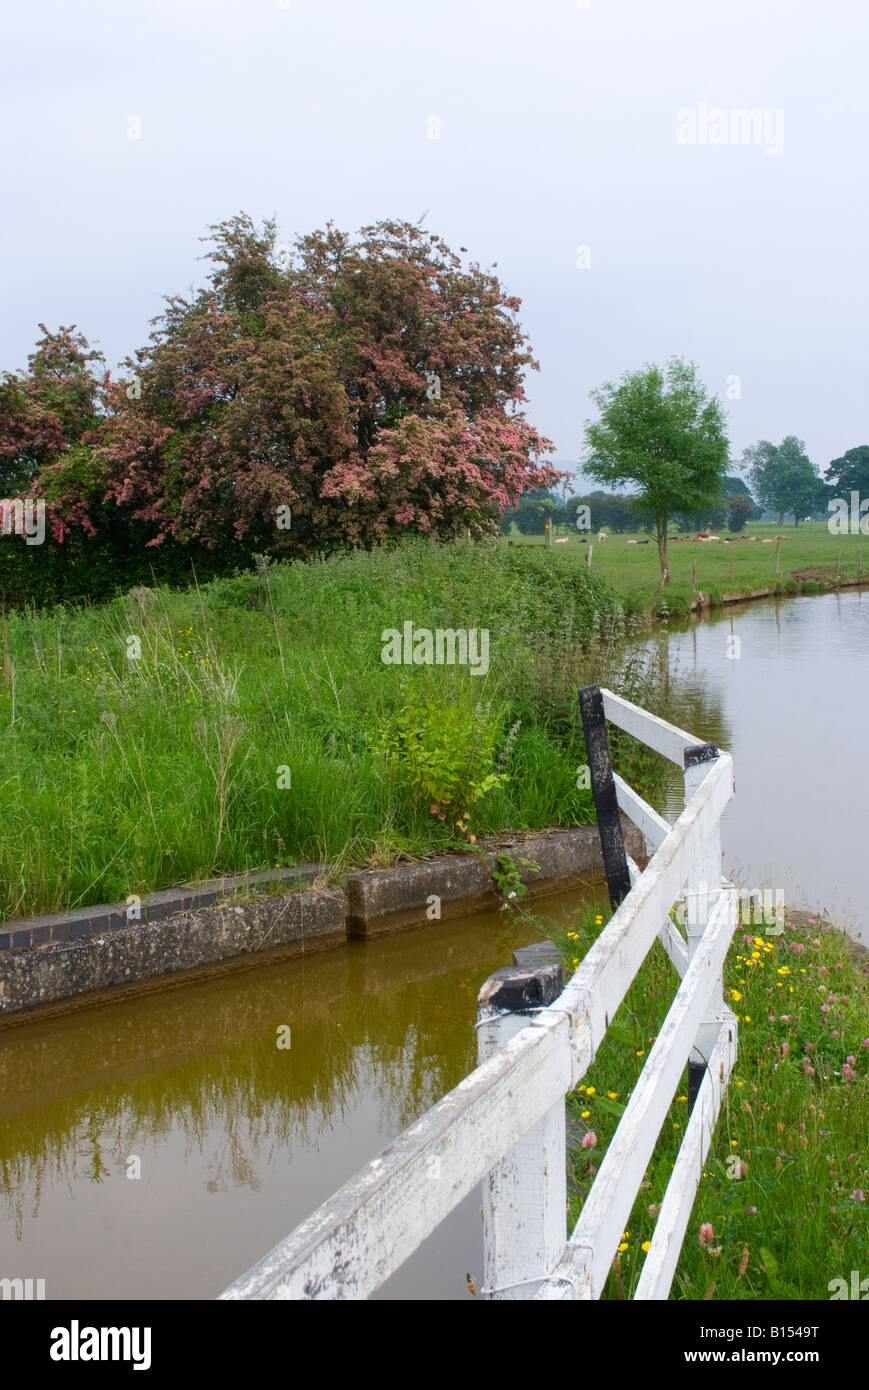 Pink Flowering Hawthorn Trees on the Bank of the Trent & Mersey Canal near Hassall Cheshire England United Kingdom Stock Photo